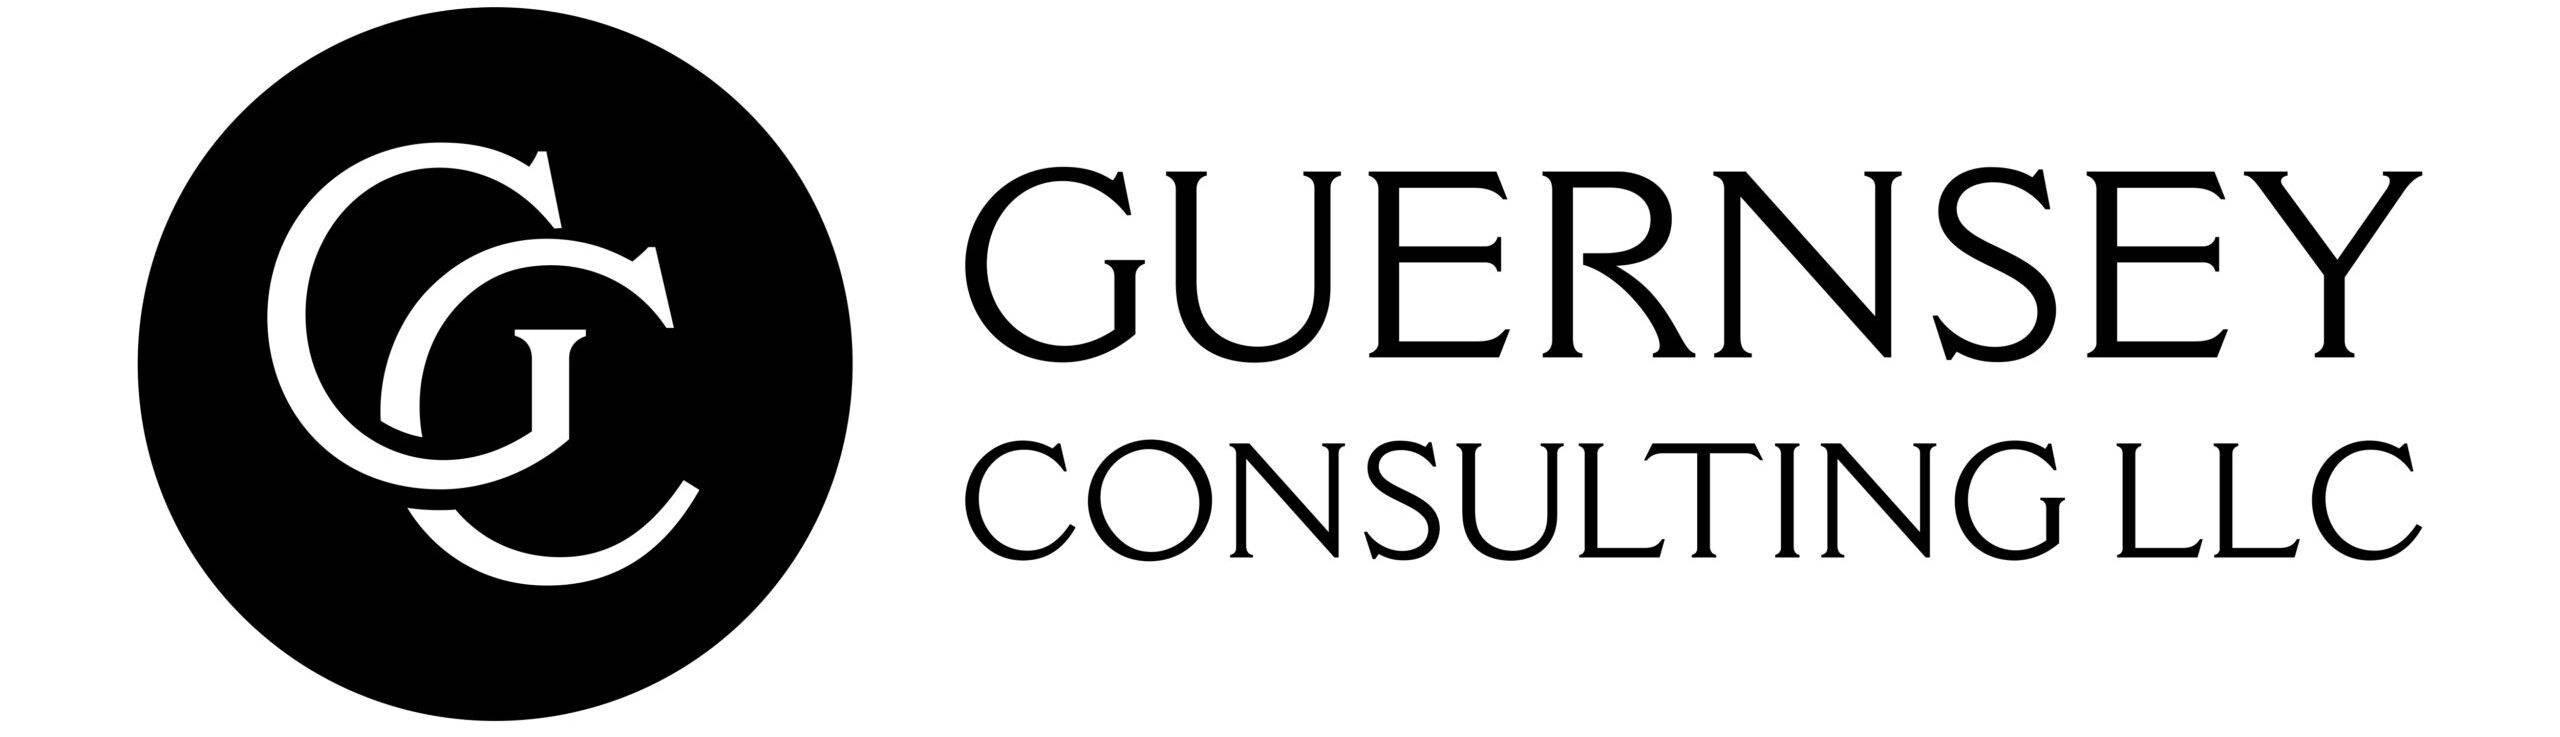 Guernsey Consulting